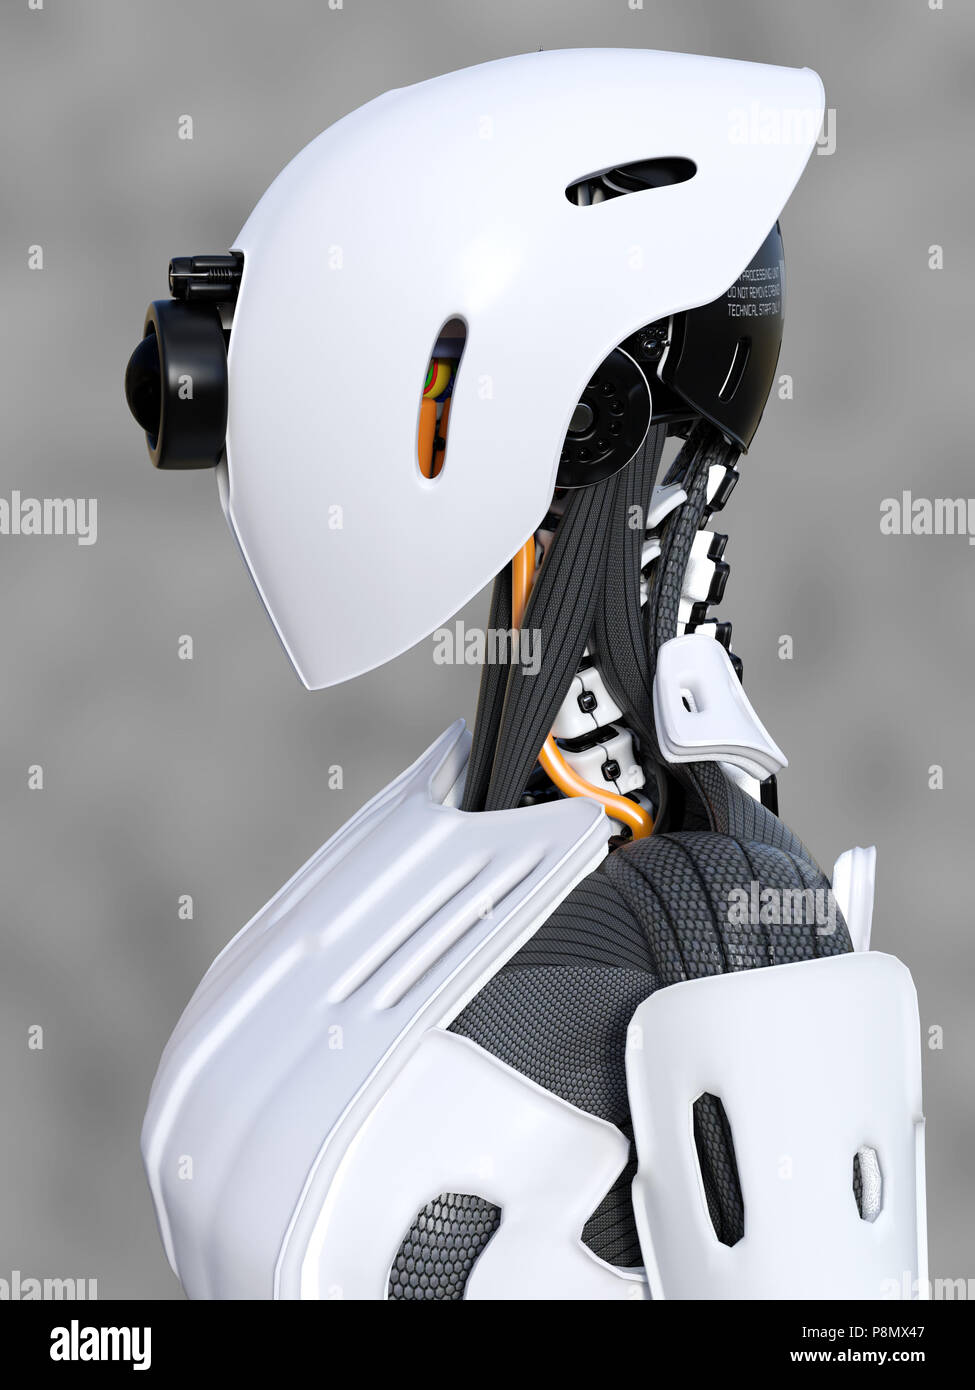 3D rendering of a female android robot head against a gray background. Stock Photo